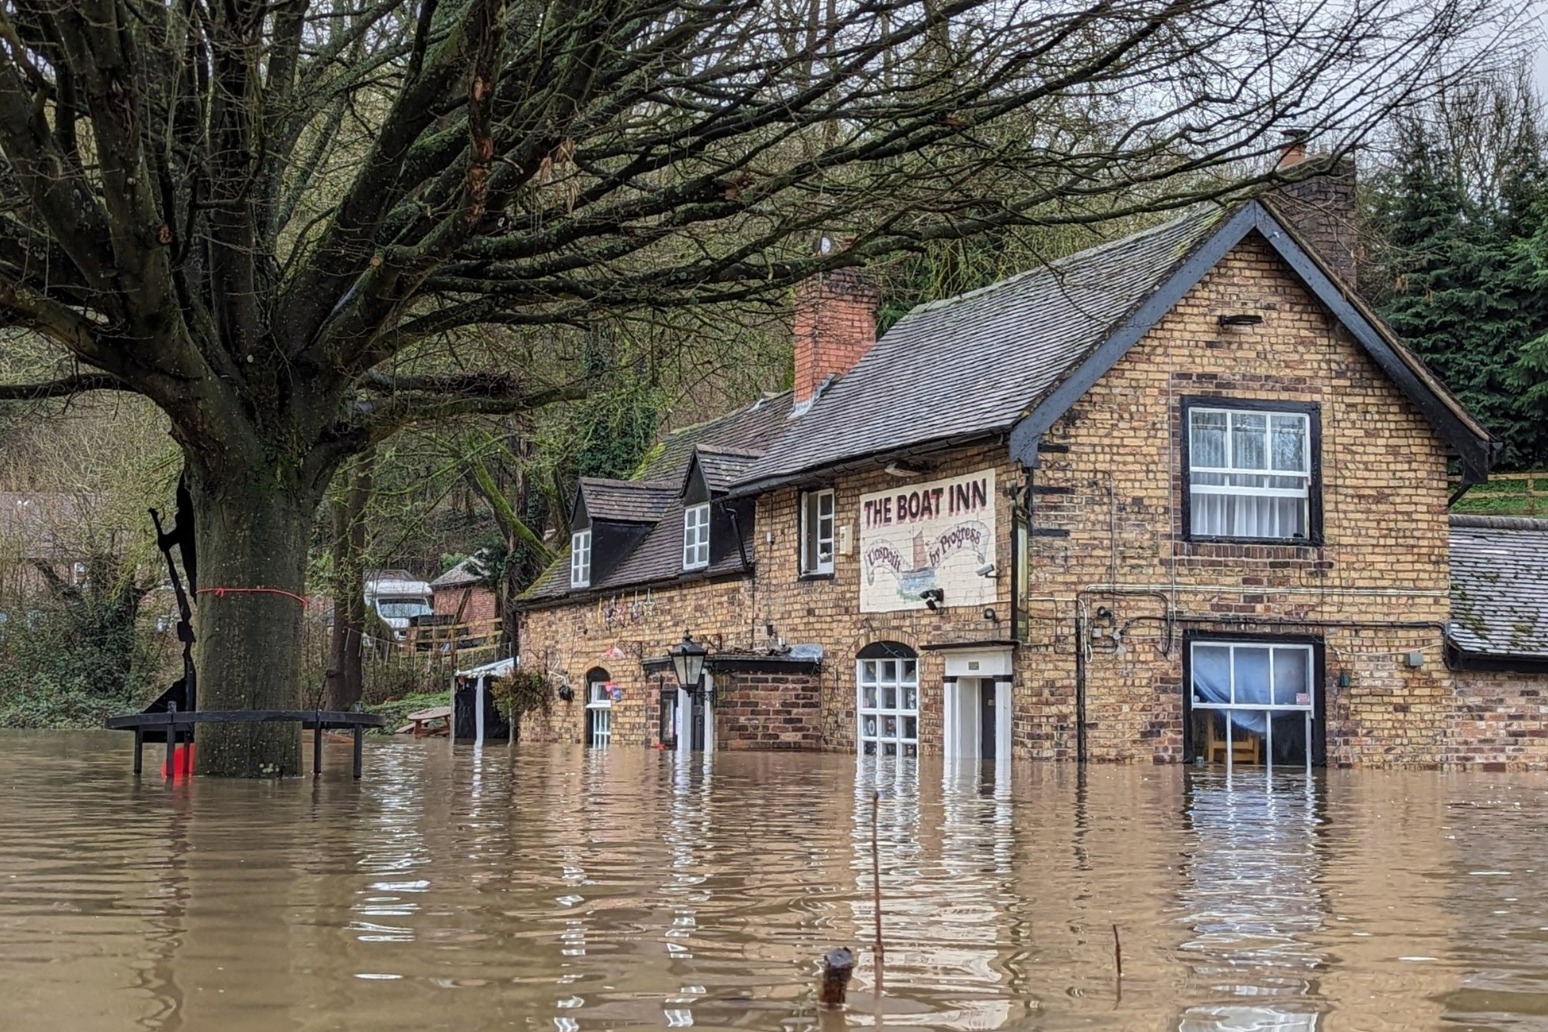 Flooding impact will continue to be ‘significant’ following rain 